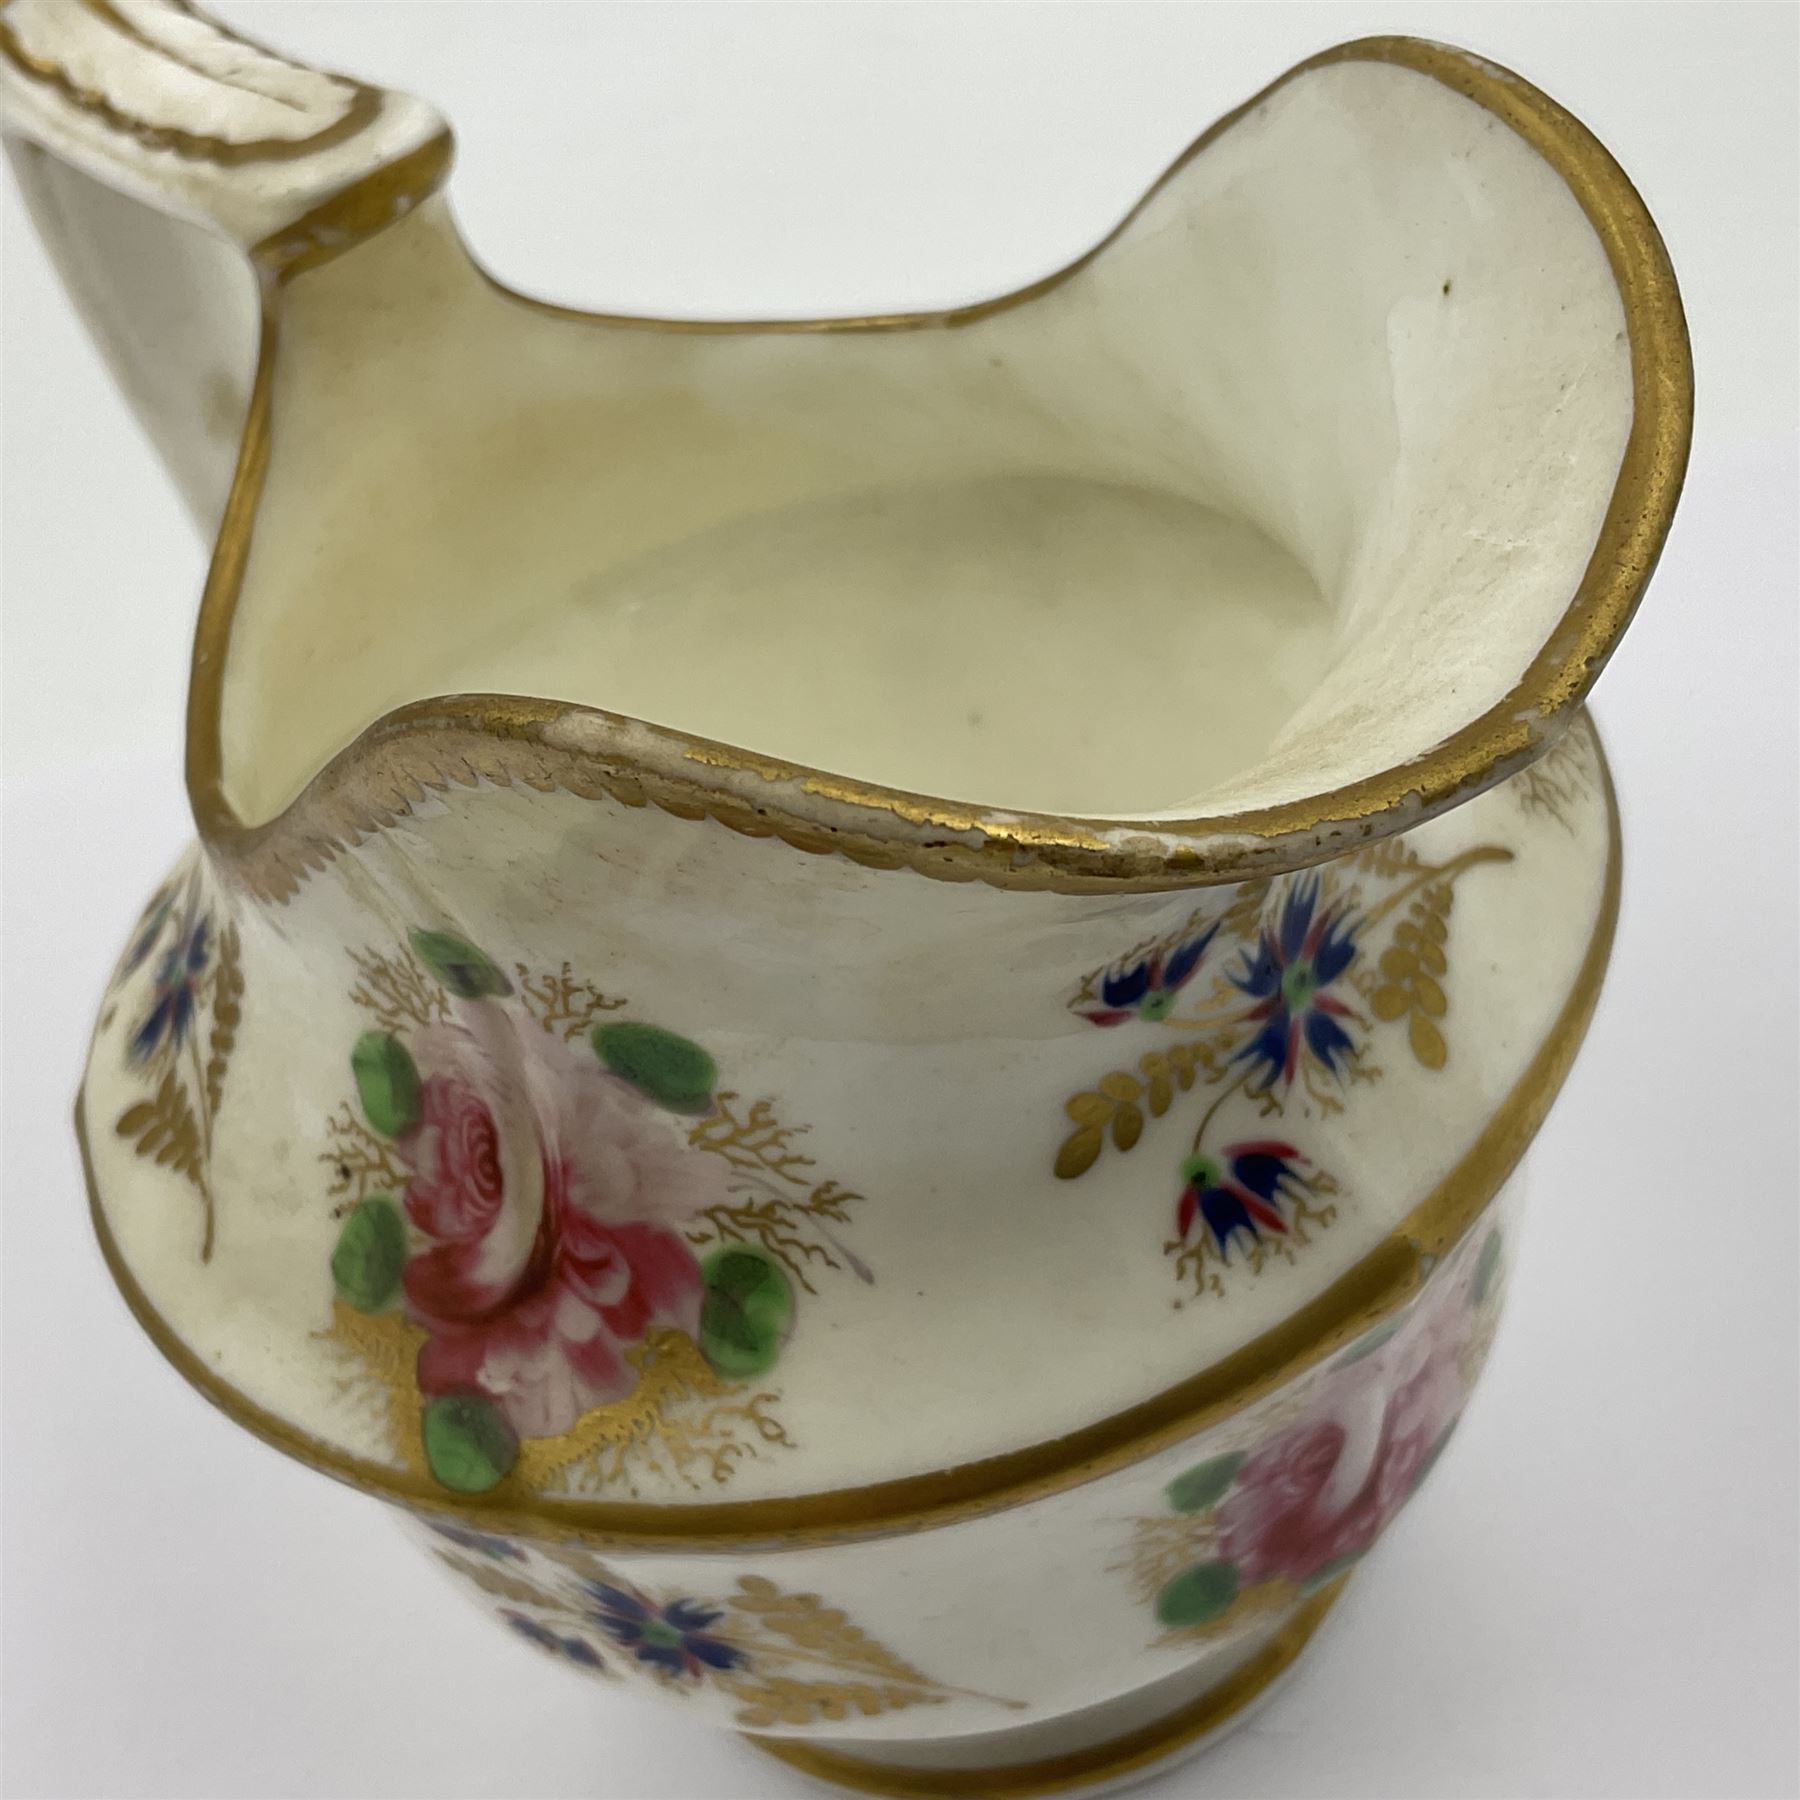 19th century Thomas Goode and Co jug - Image 13 of 22